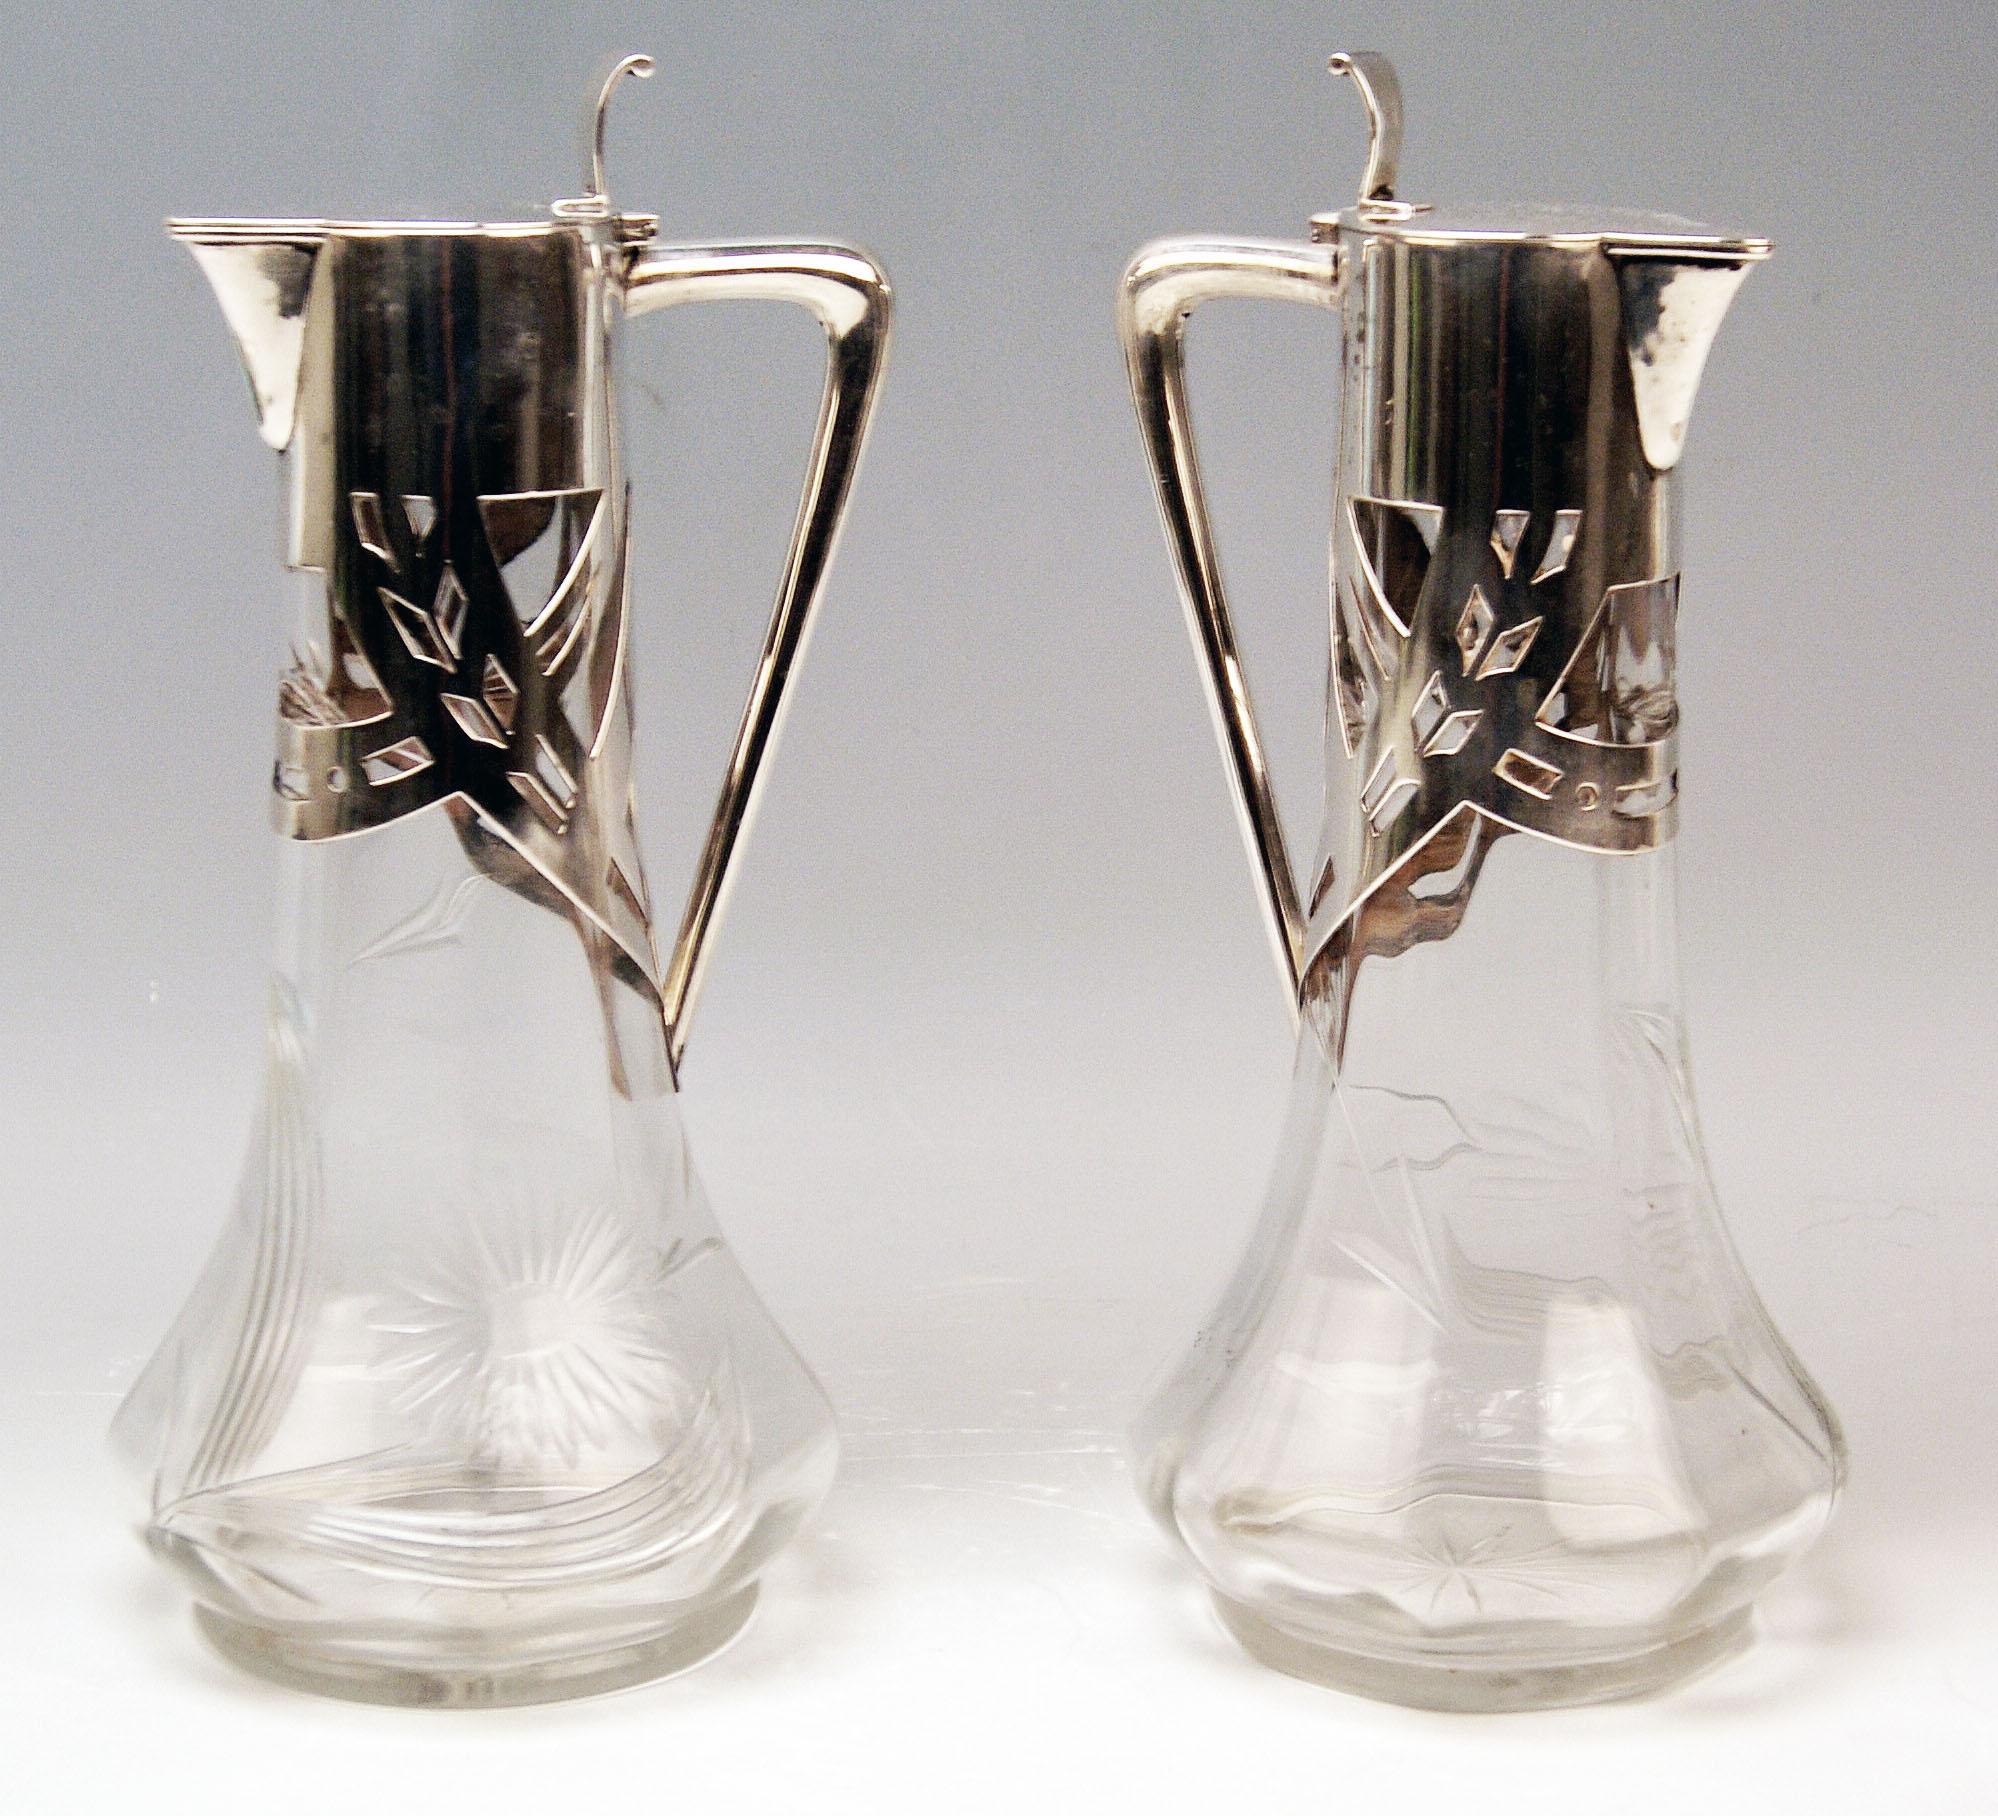 Pair of Art Nouveau Glass Decanters (Carafes / Jugs) with Silver Mountings 

Marks:
-- Walking Lion of Firm Deyhle Brothers, Germany / Schwaebisch Gmuend (= manufactory founded 1820) 
-- branded by German Crescent with Crown, used as from year